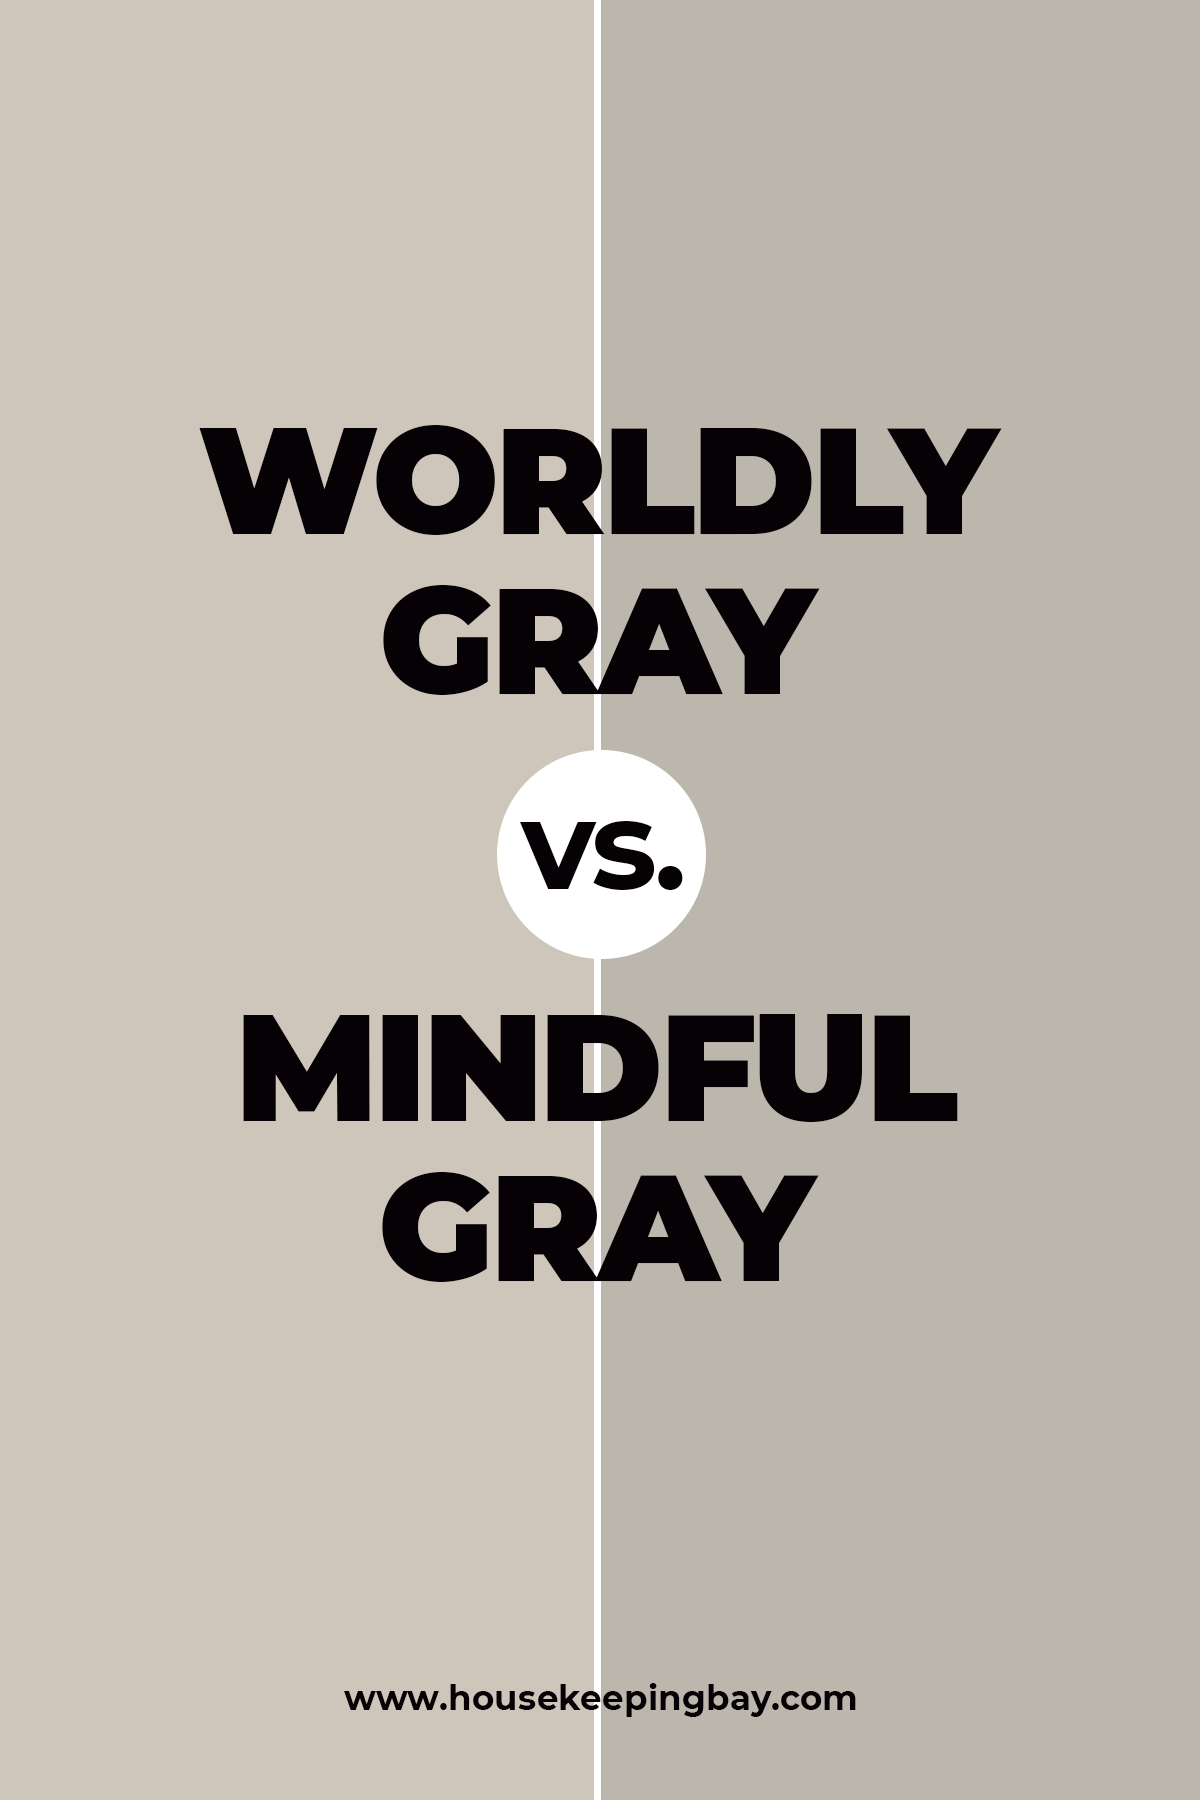 Worldly Gray vs. Mindful Gray